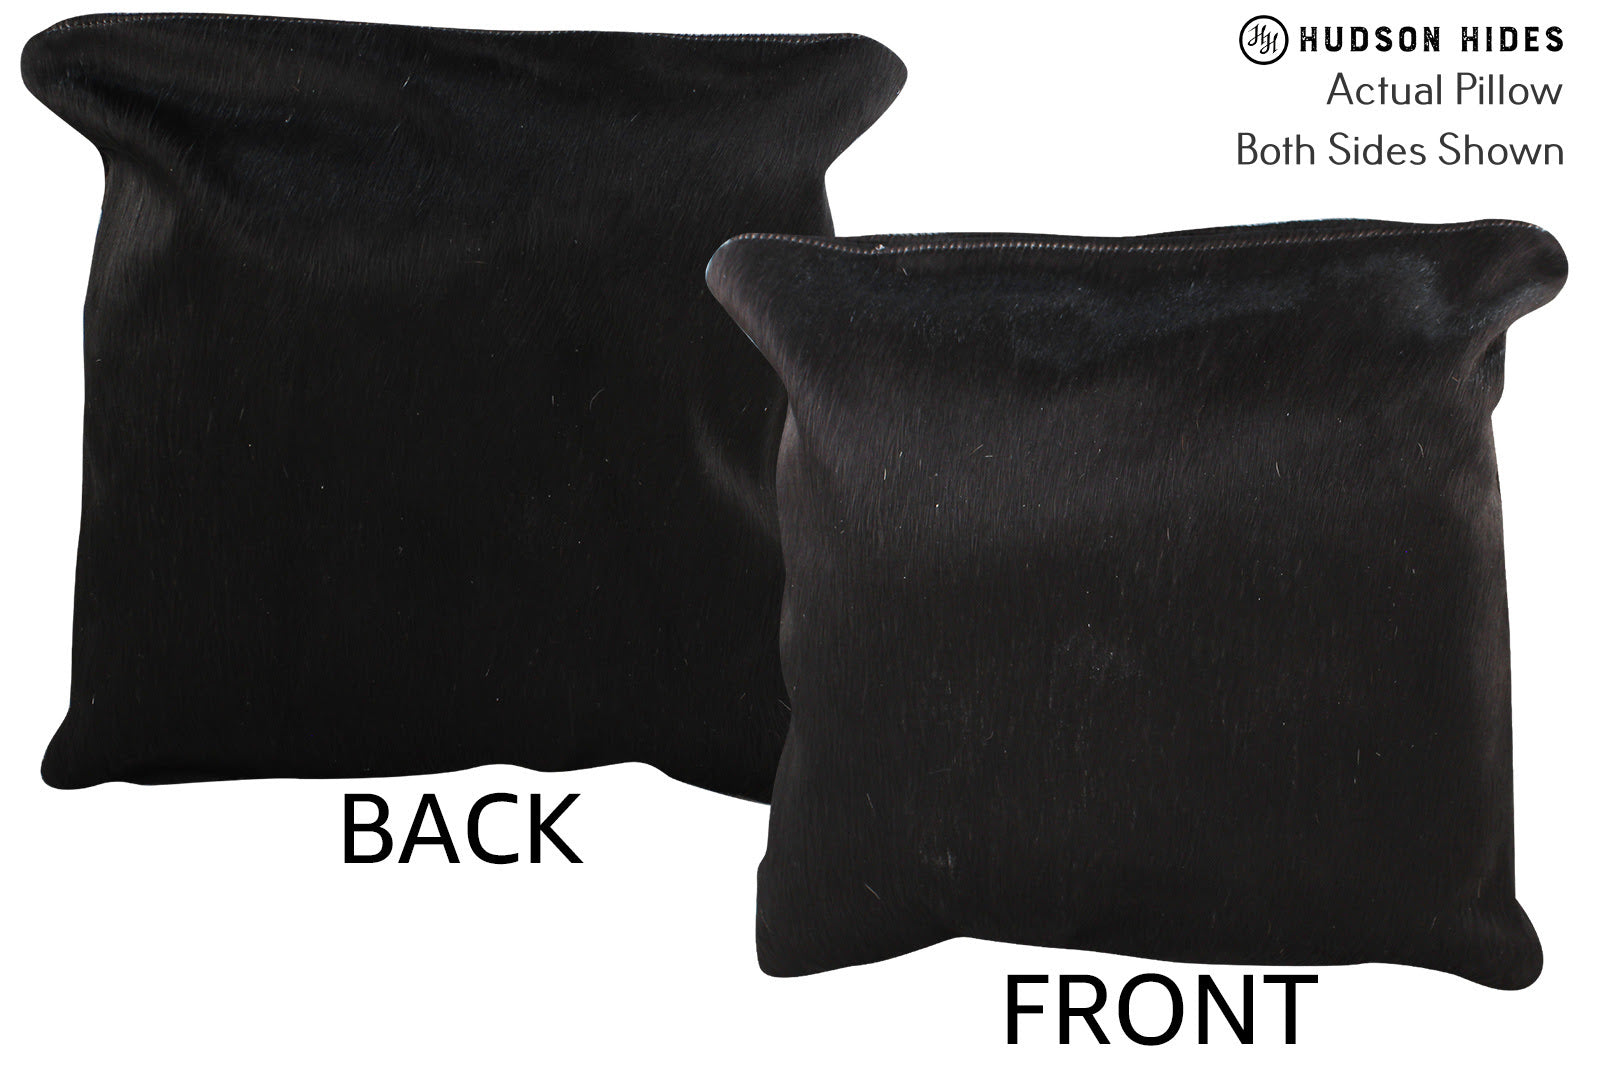 Solid Black Cowhide Pillow #74724